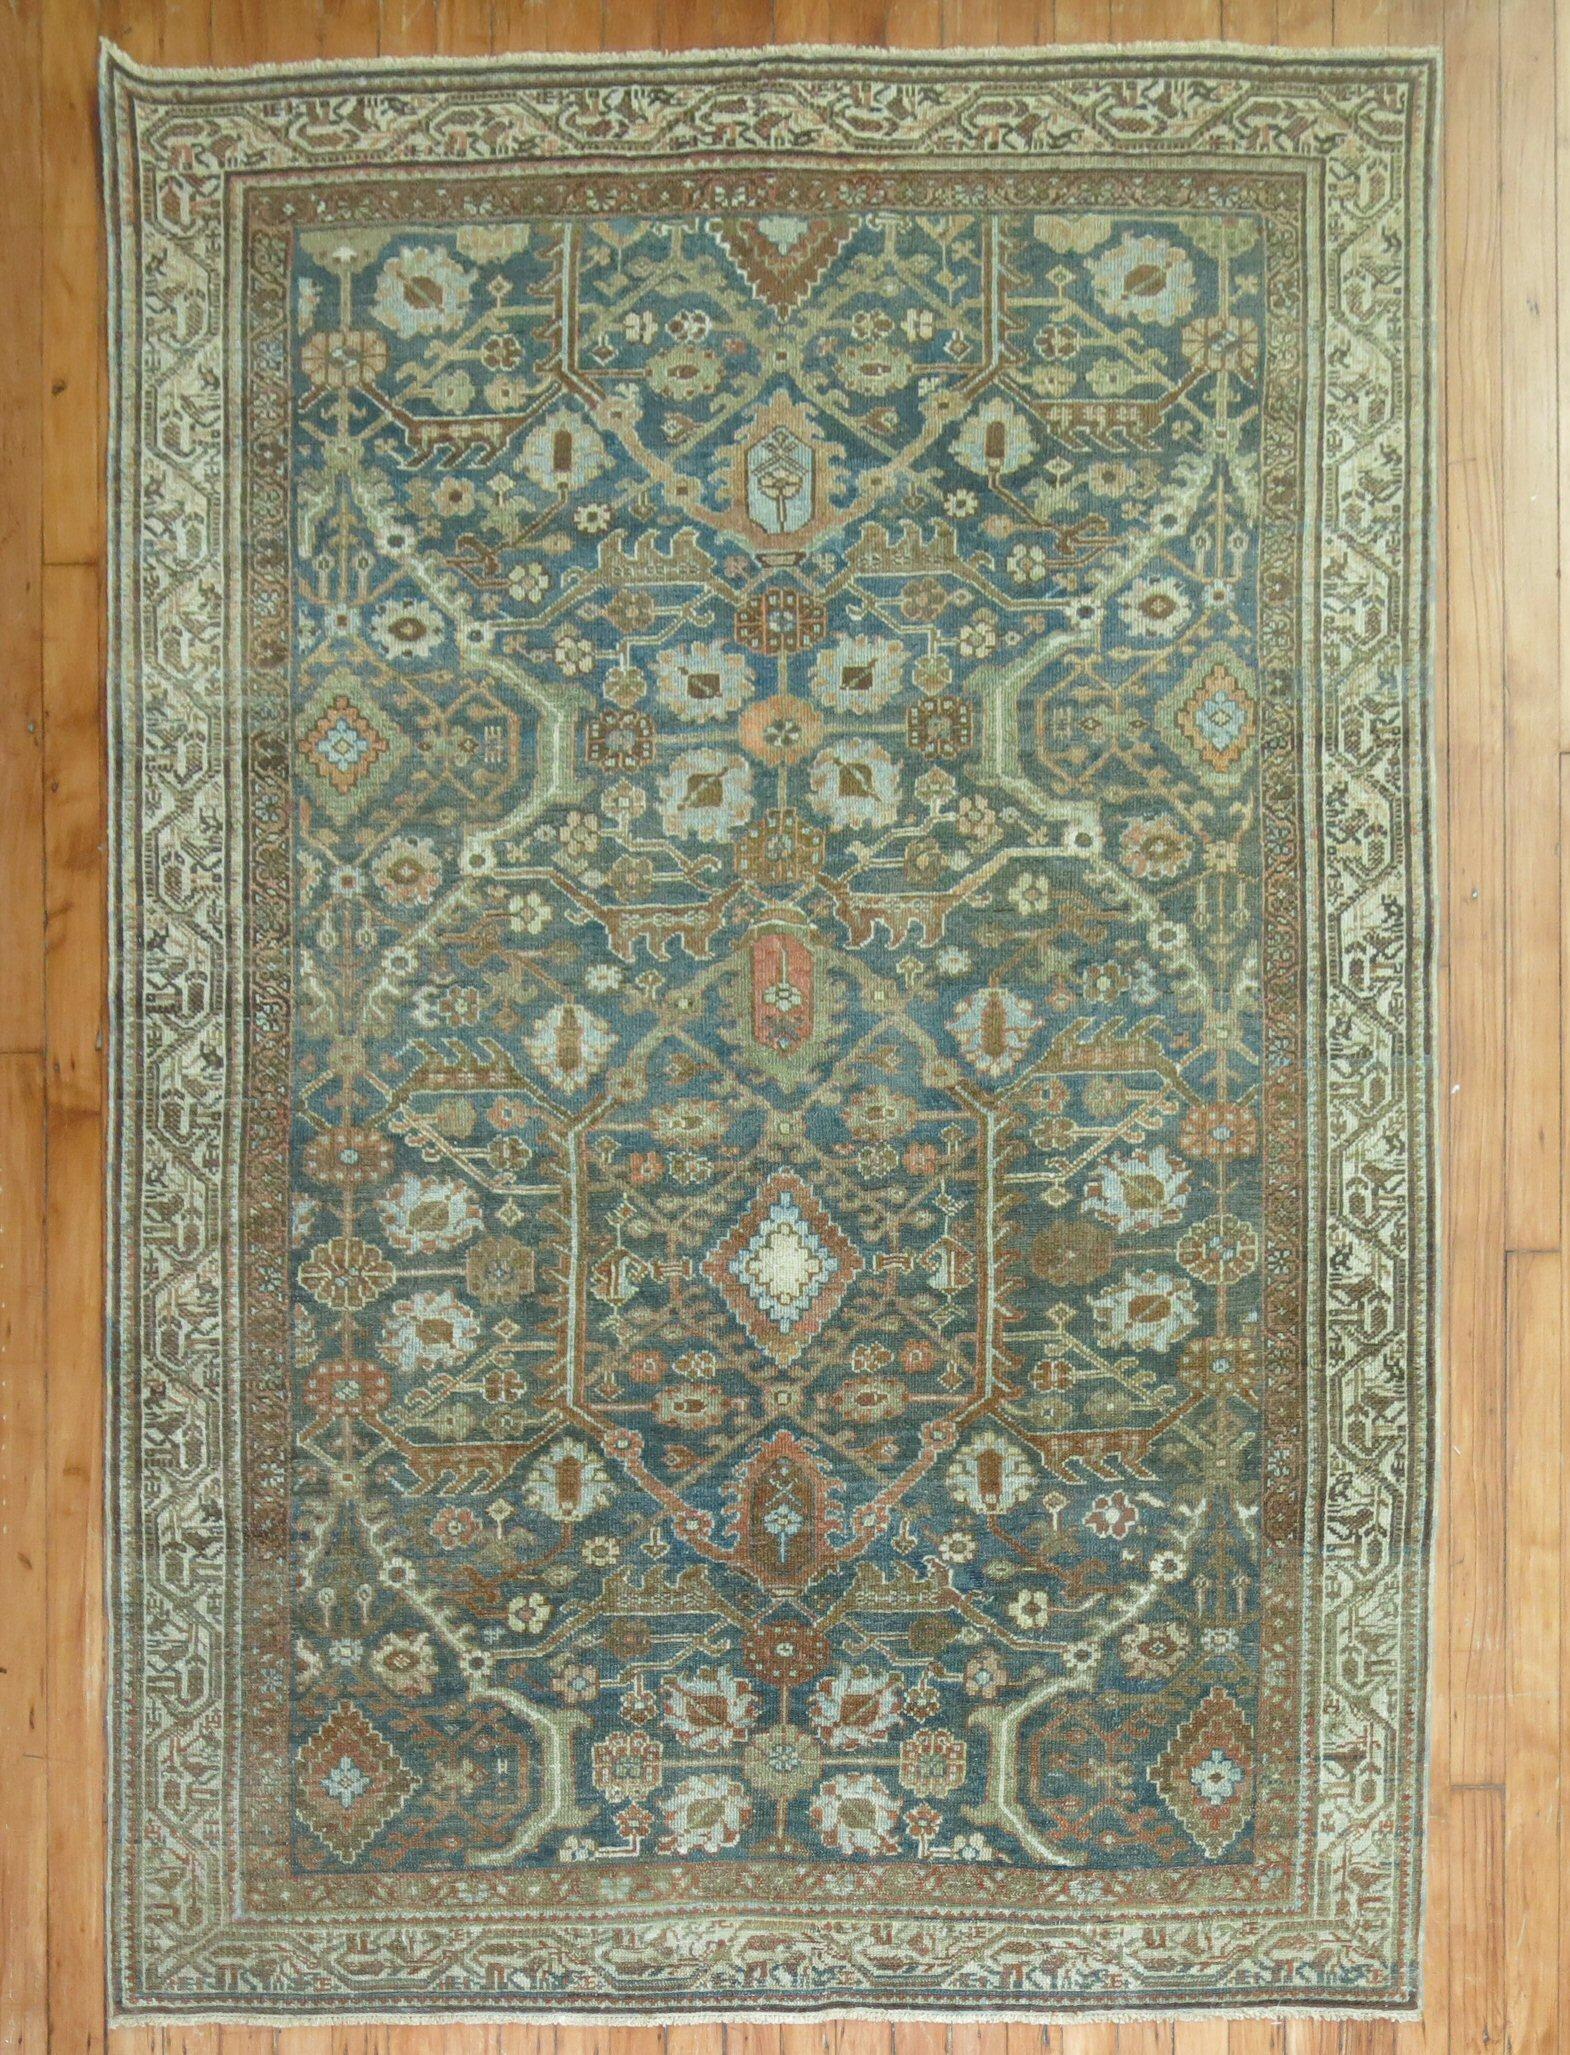 An accent size early 20th century Persian Malayer rug in green, ivory, and copper tones

Measures: 4'6